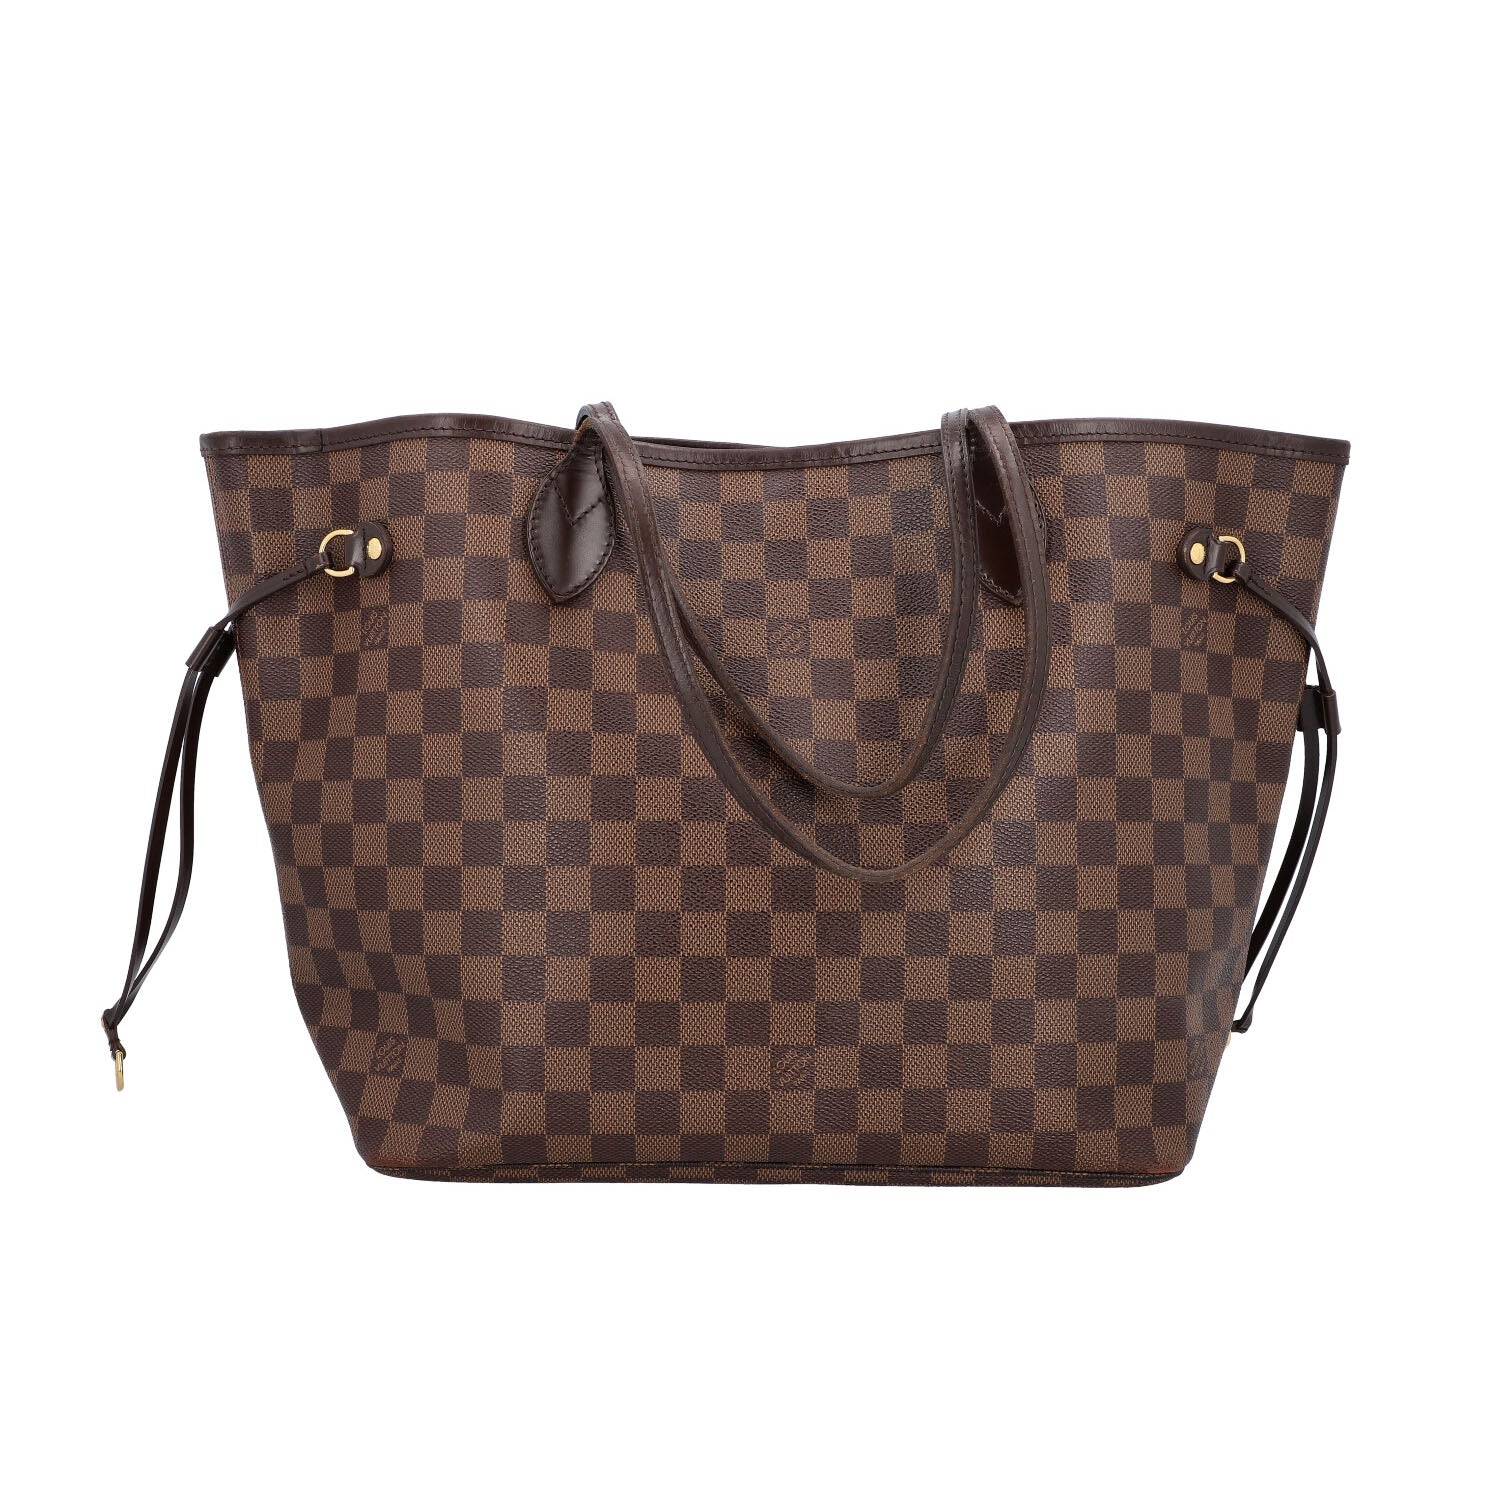 Louis Vuitton Neverfull - A full review on this timeless tote + photos!